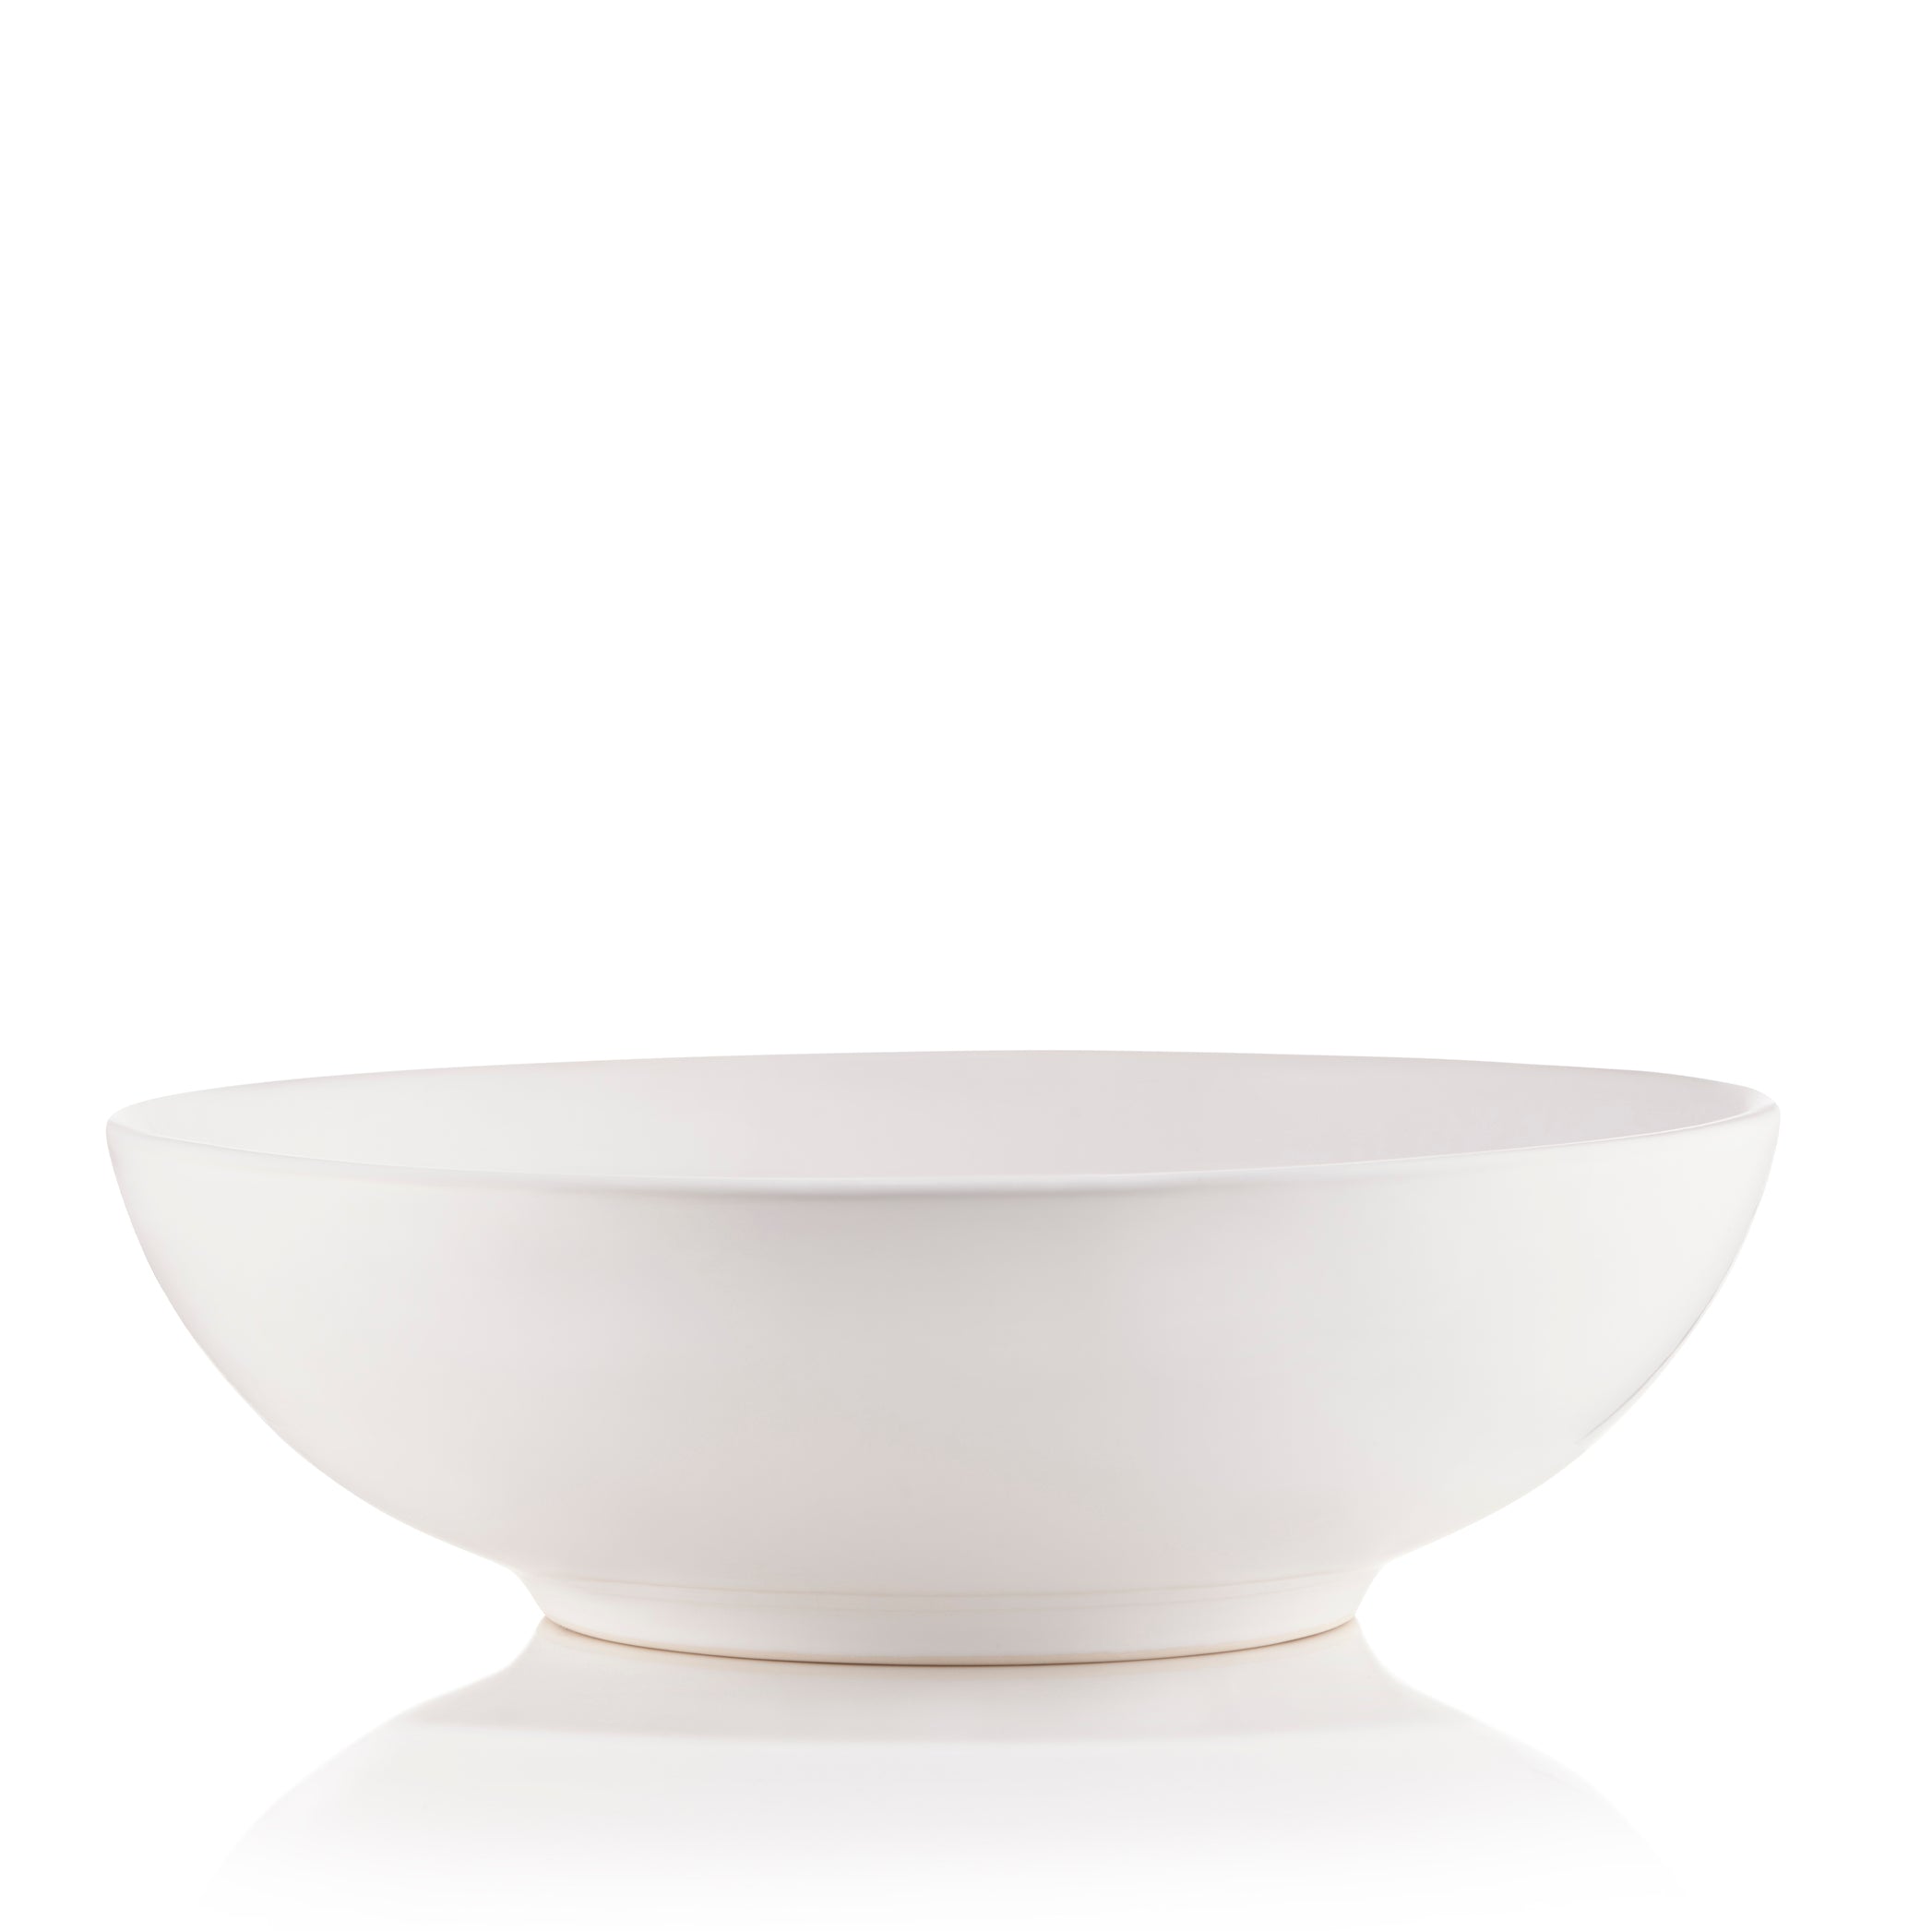 S&B White Serving Bowl with A Heart in Avocado Green